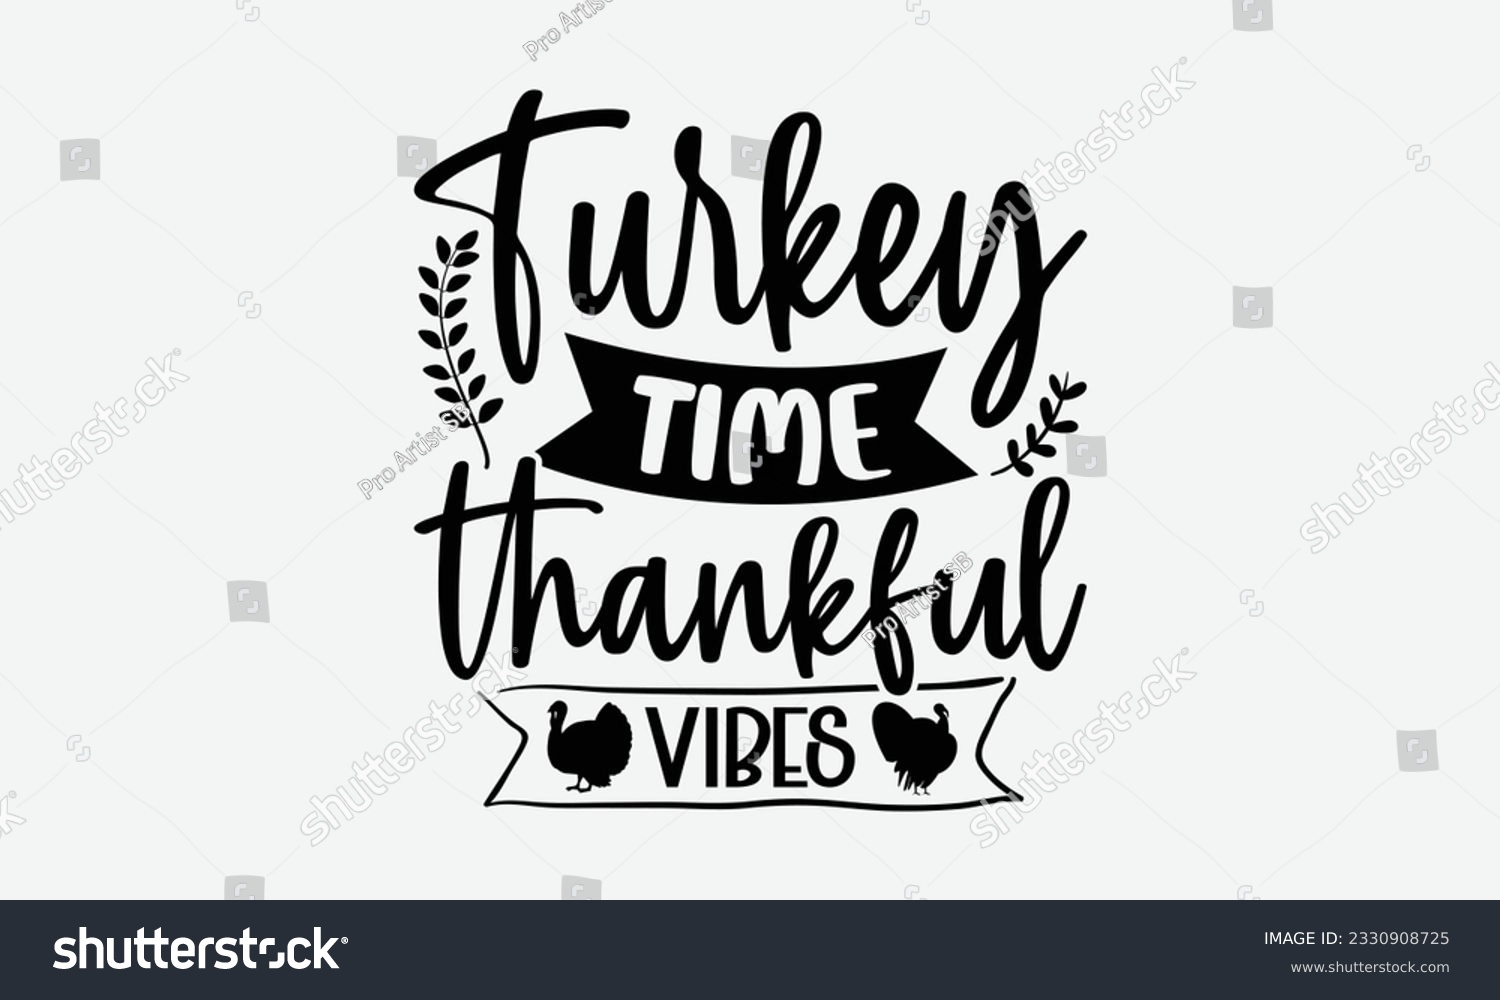 SVG of Turkey Time Thankful Vibes - Thanksgiving T-shirt Design Template, Happy Turkey Day SVG Quotes, Hand Drawn Lettering Phrase Isolated On White Background. svg